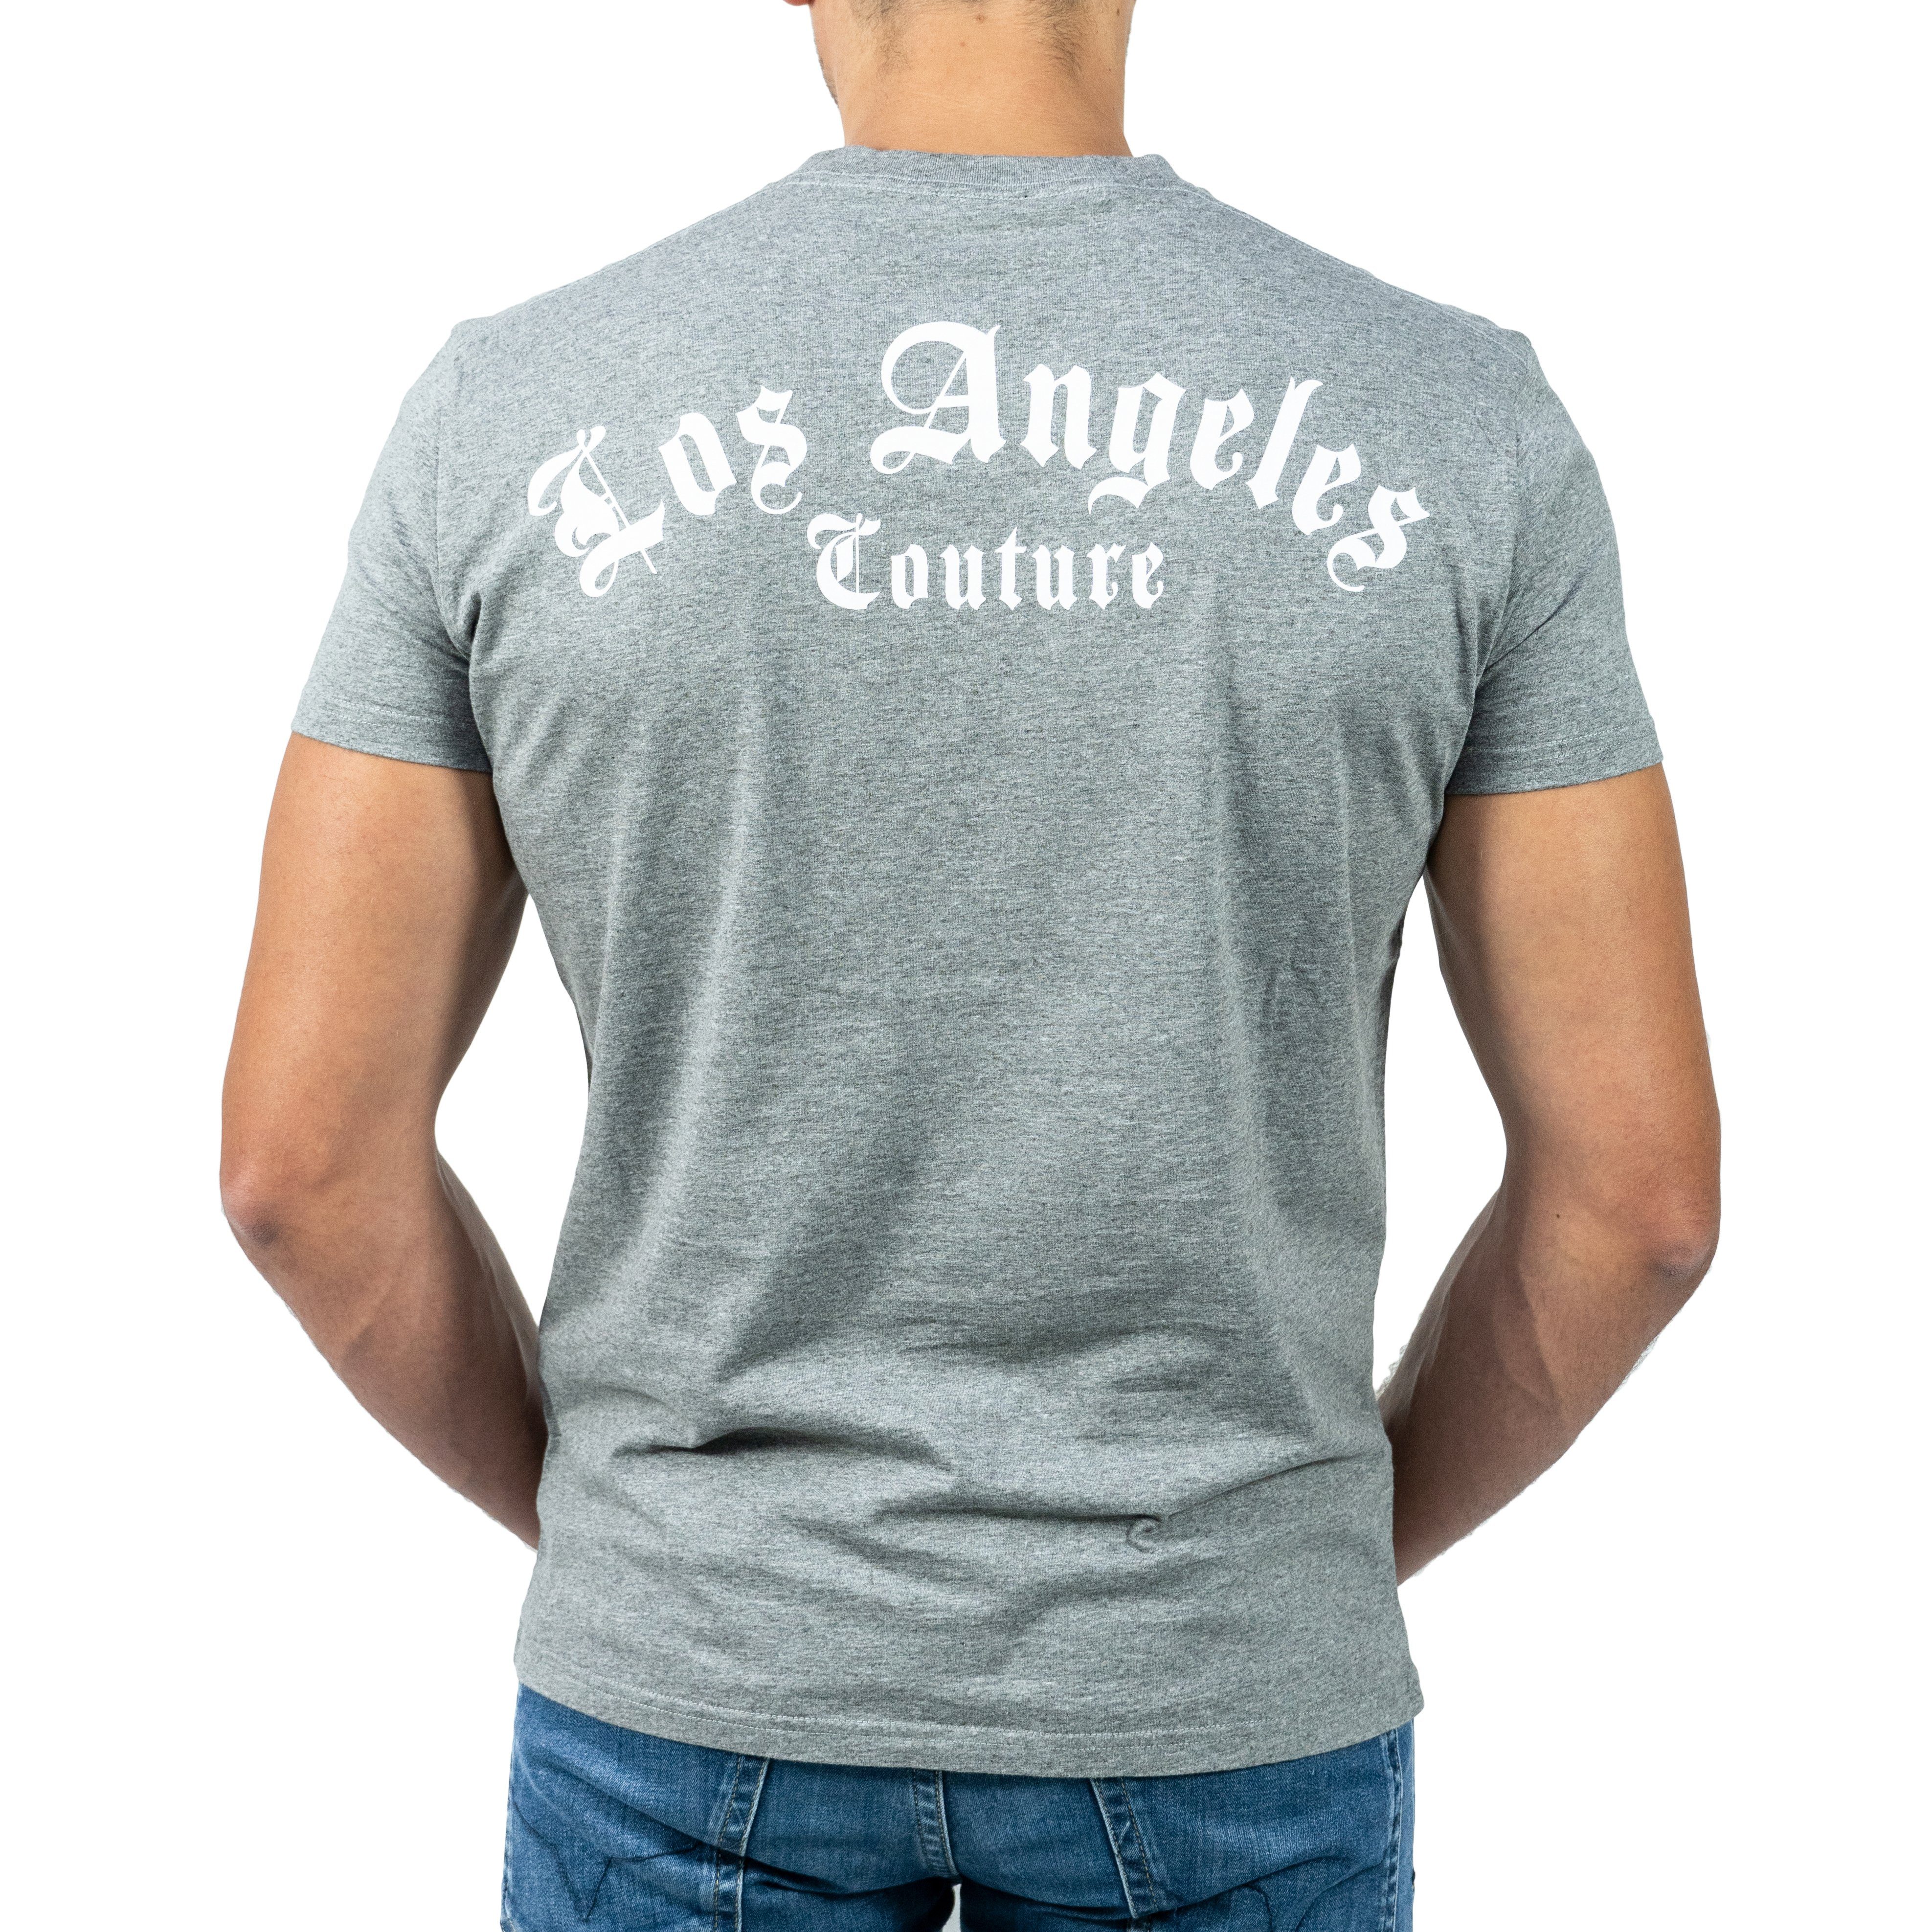 Brand Chiccheria Designed Angeles, T-Shirt in Los Couture Grau Angeles Los